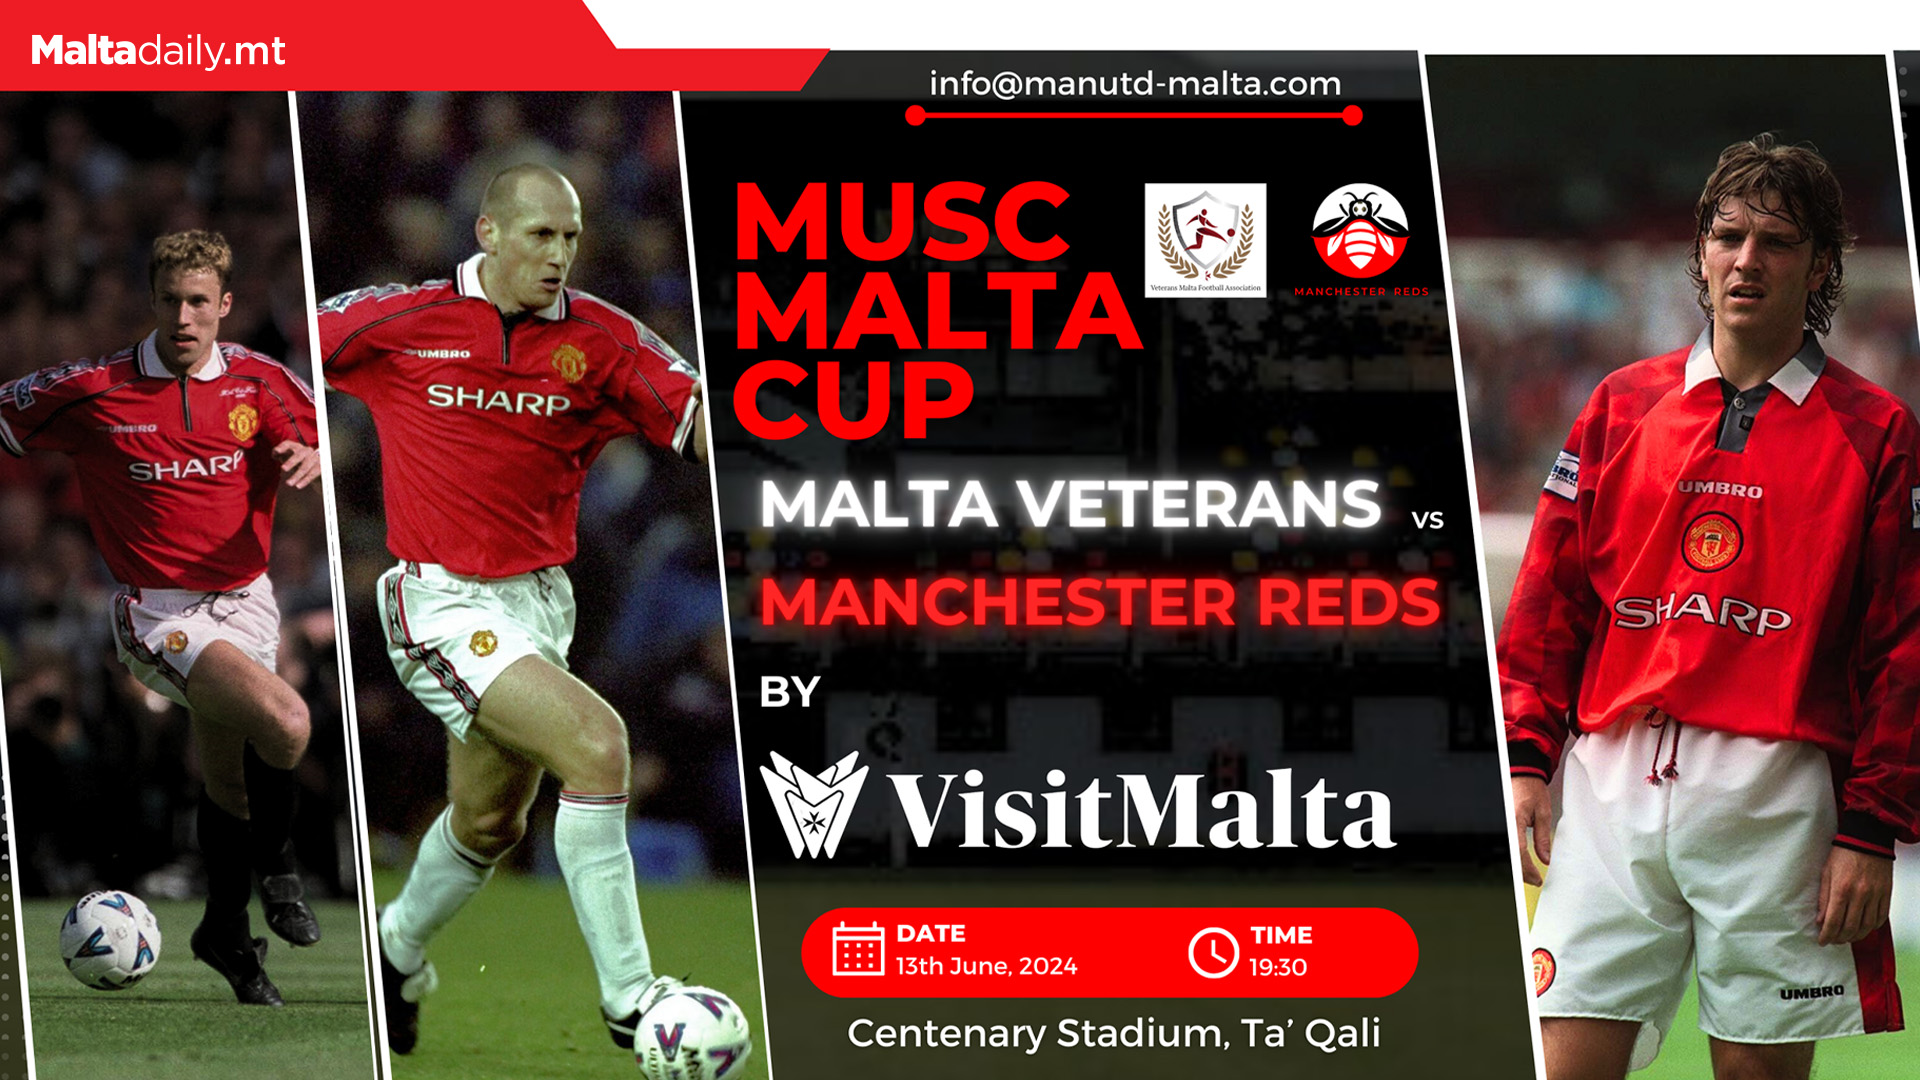 16 Former Manchester United Players To Pay In Malta